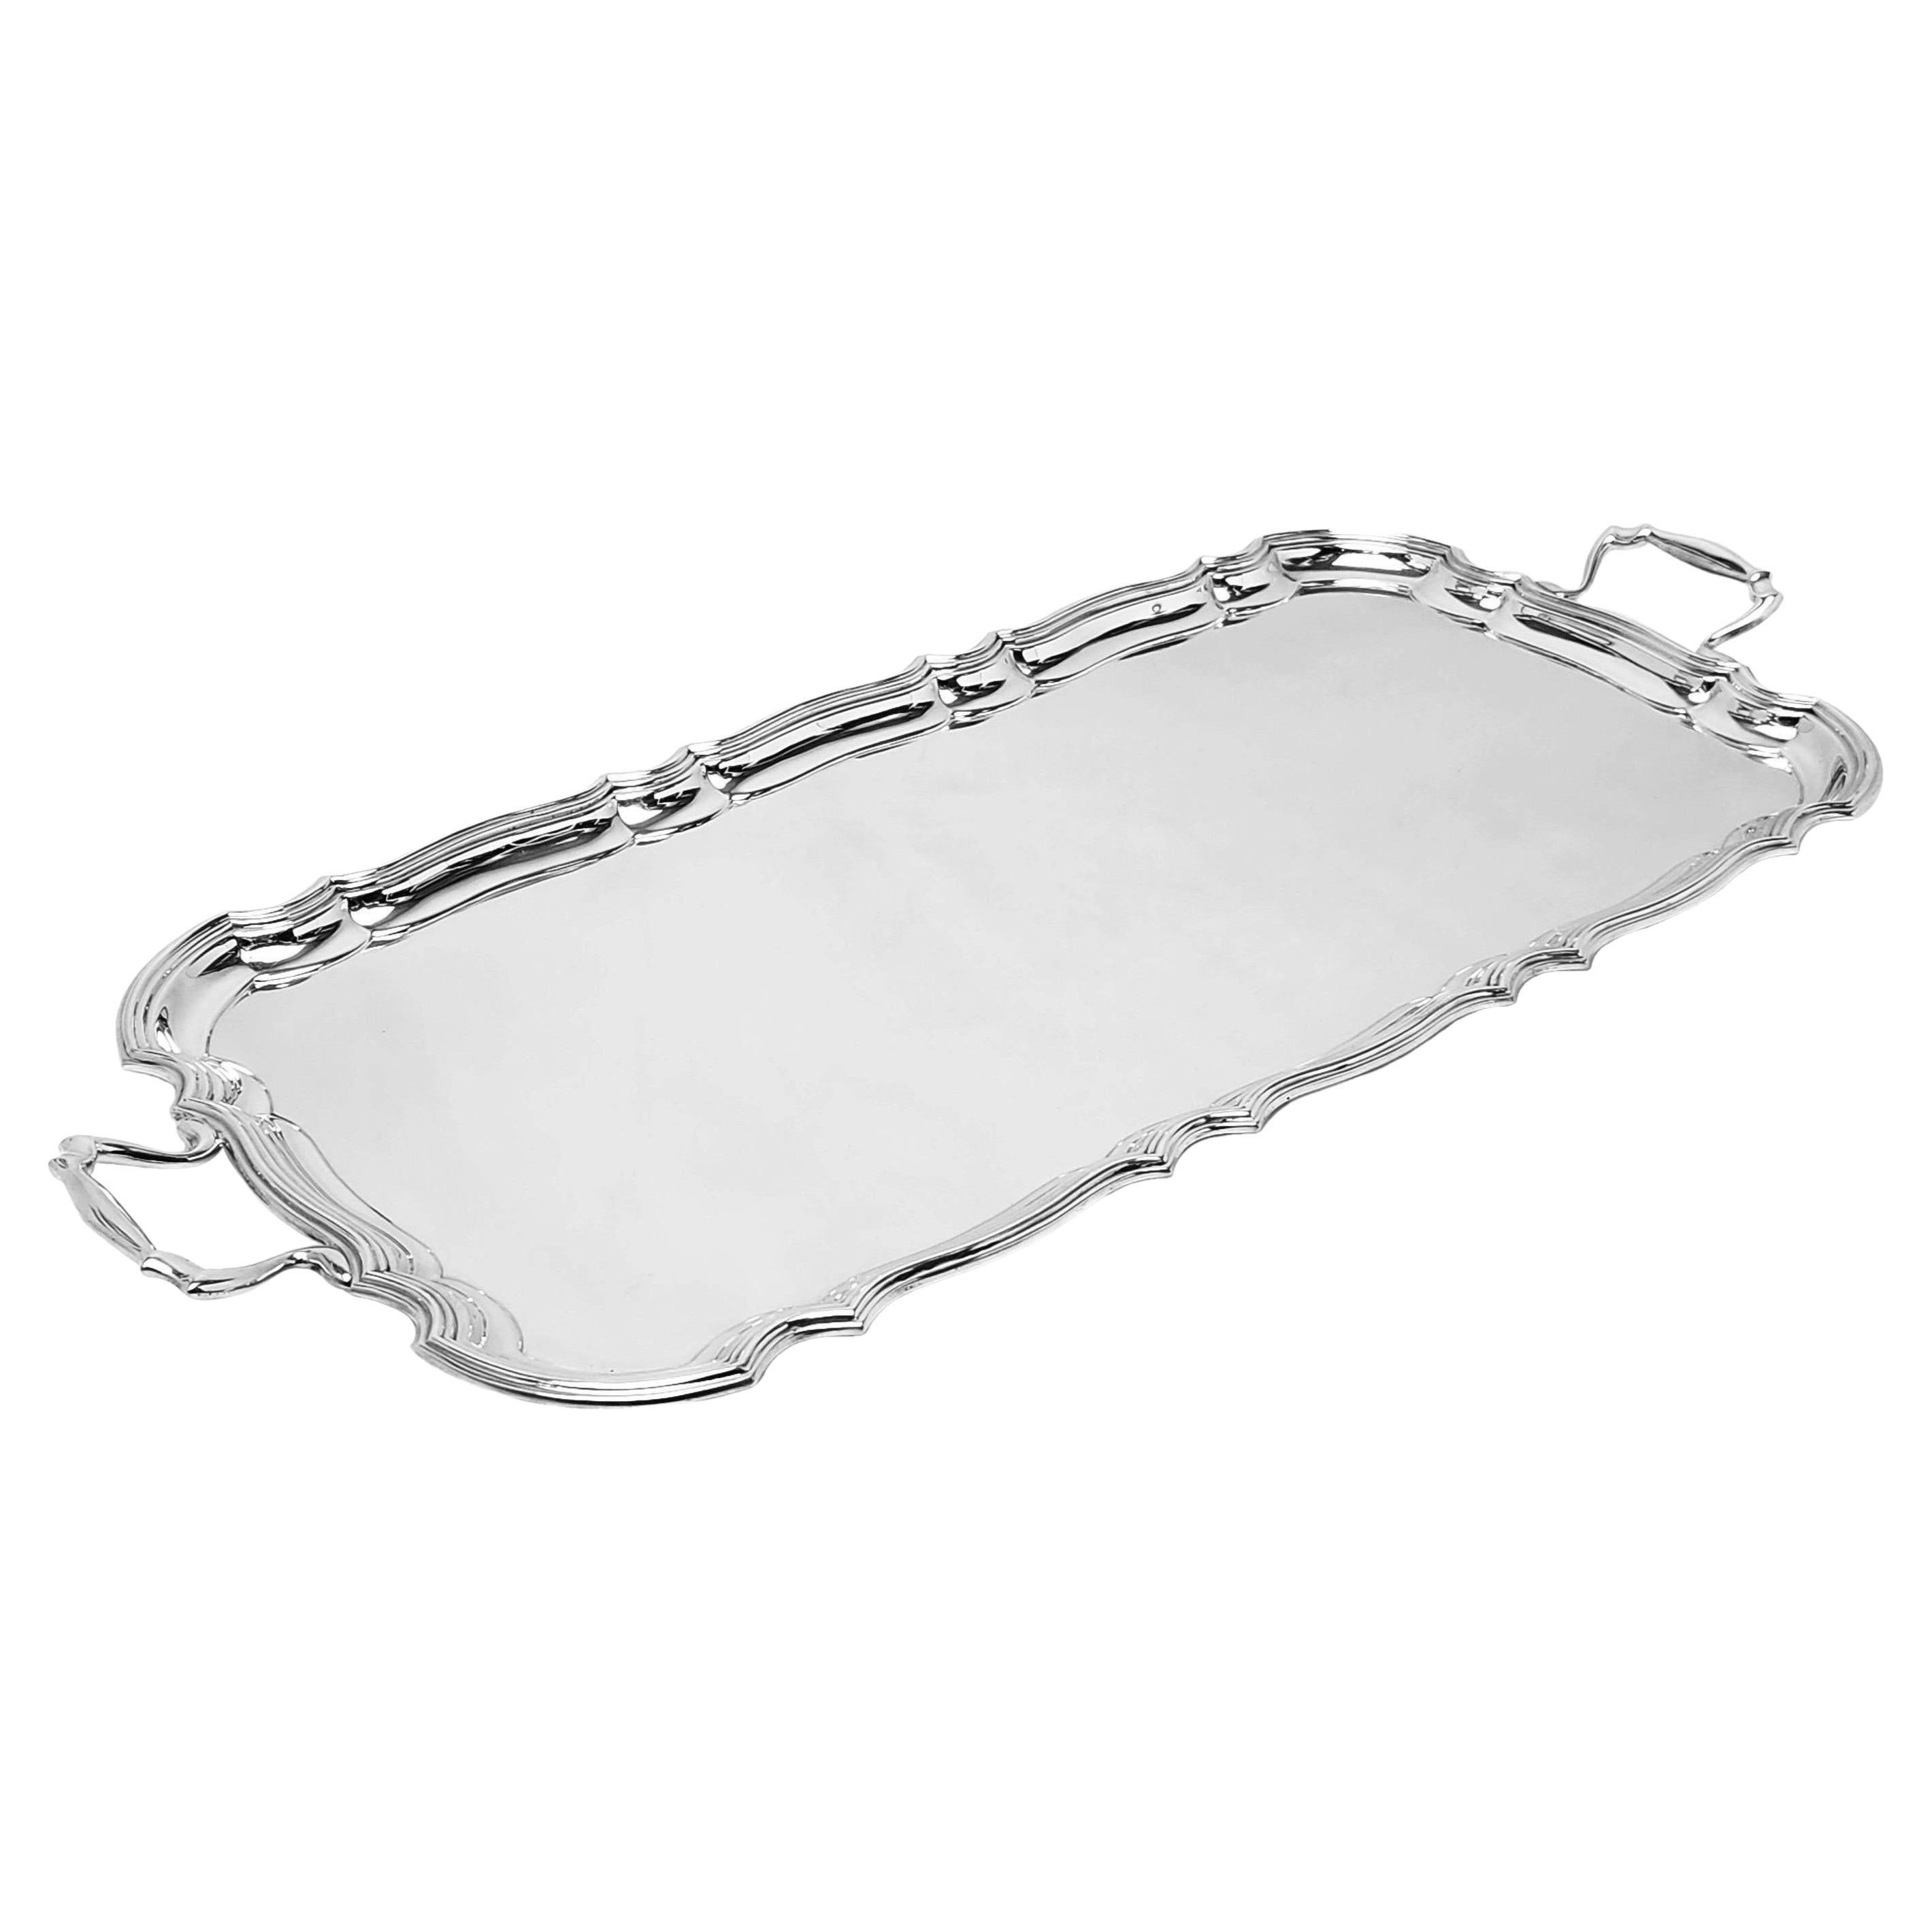 Antique Sterling Silver Tray 1915 Sandwich Serving Platter For Sale